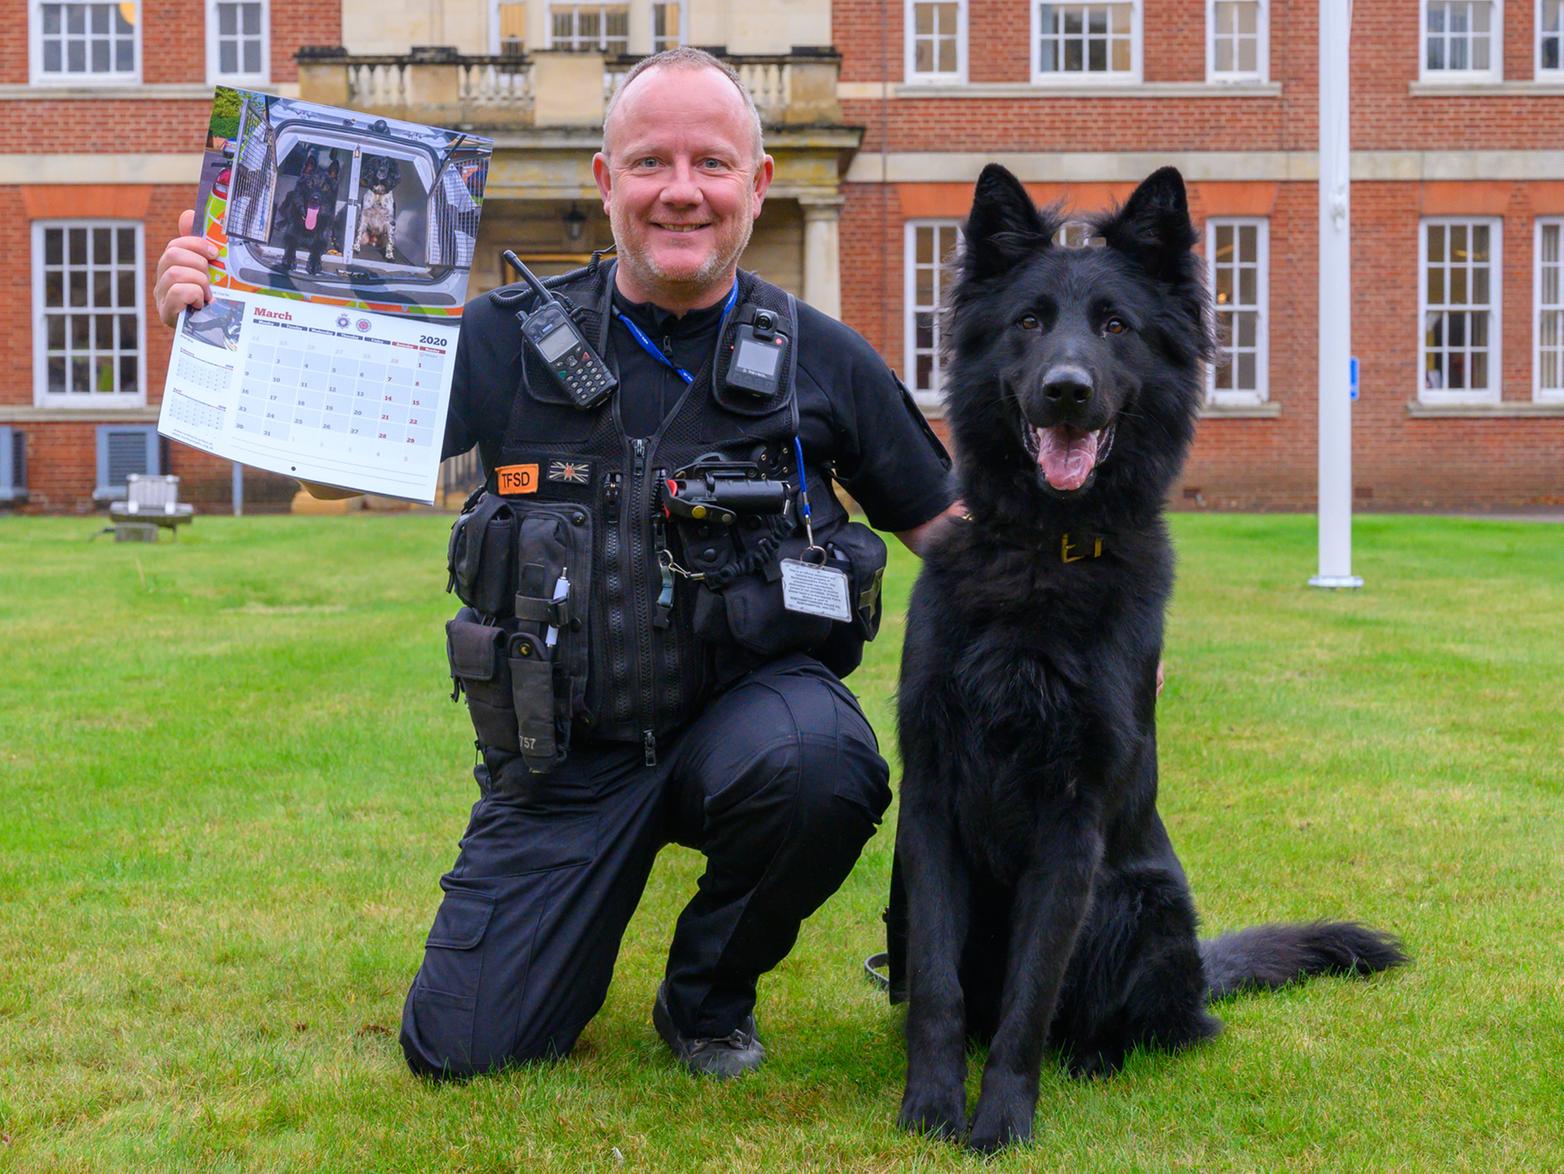 A donation will also be made to the National K9 Police Dog Memorial, a charity raising funds to honour the many dogs who have played such a vital role within the police service across the country.